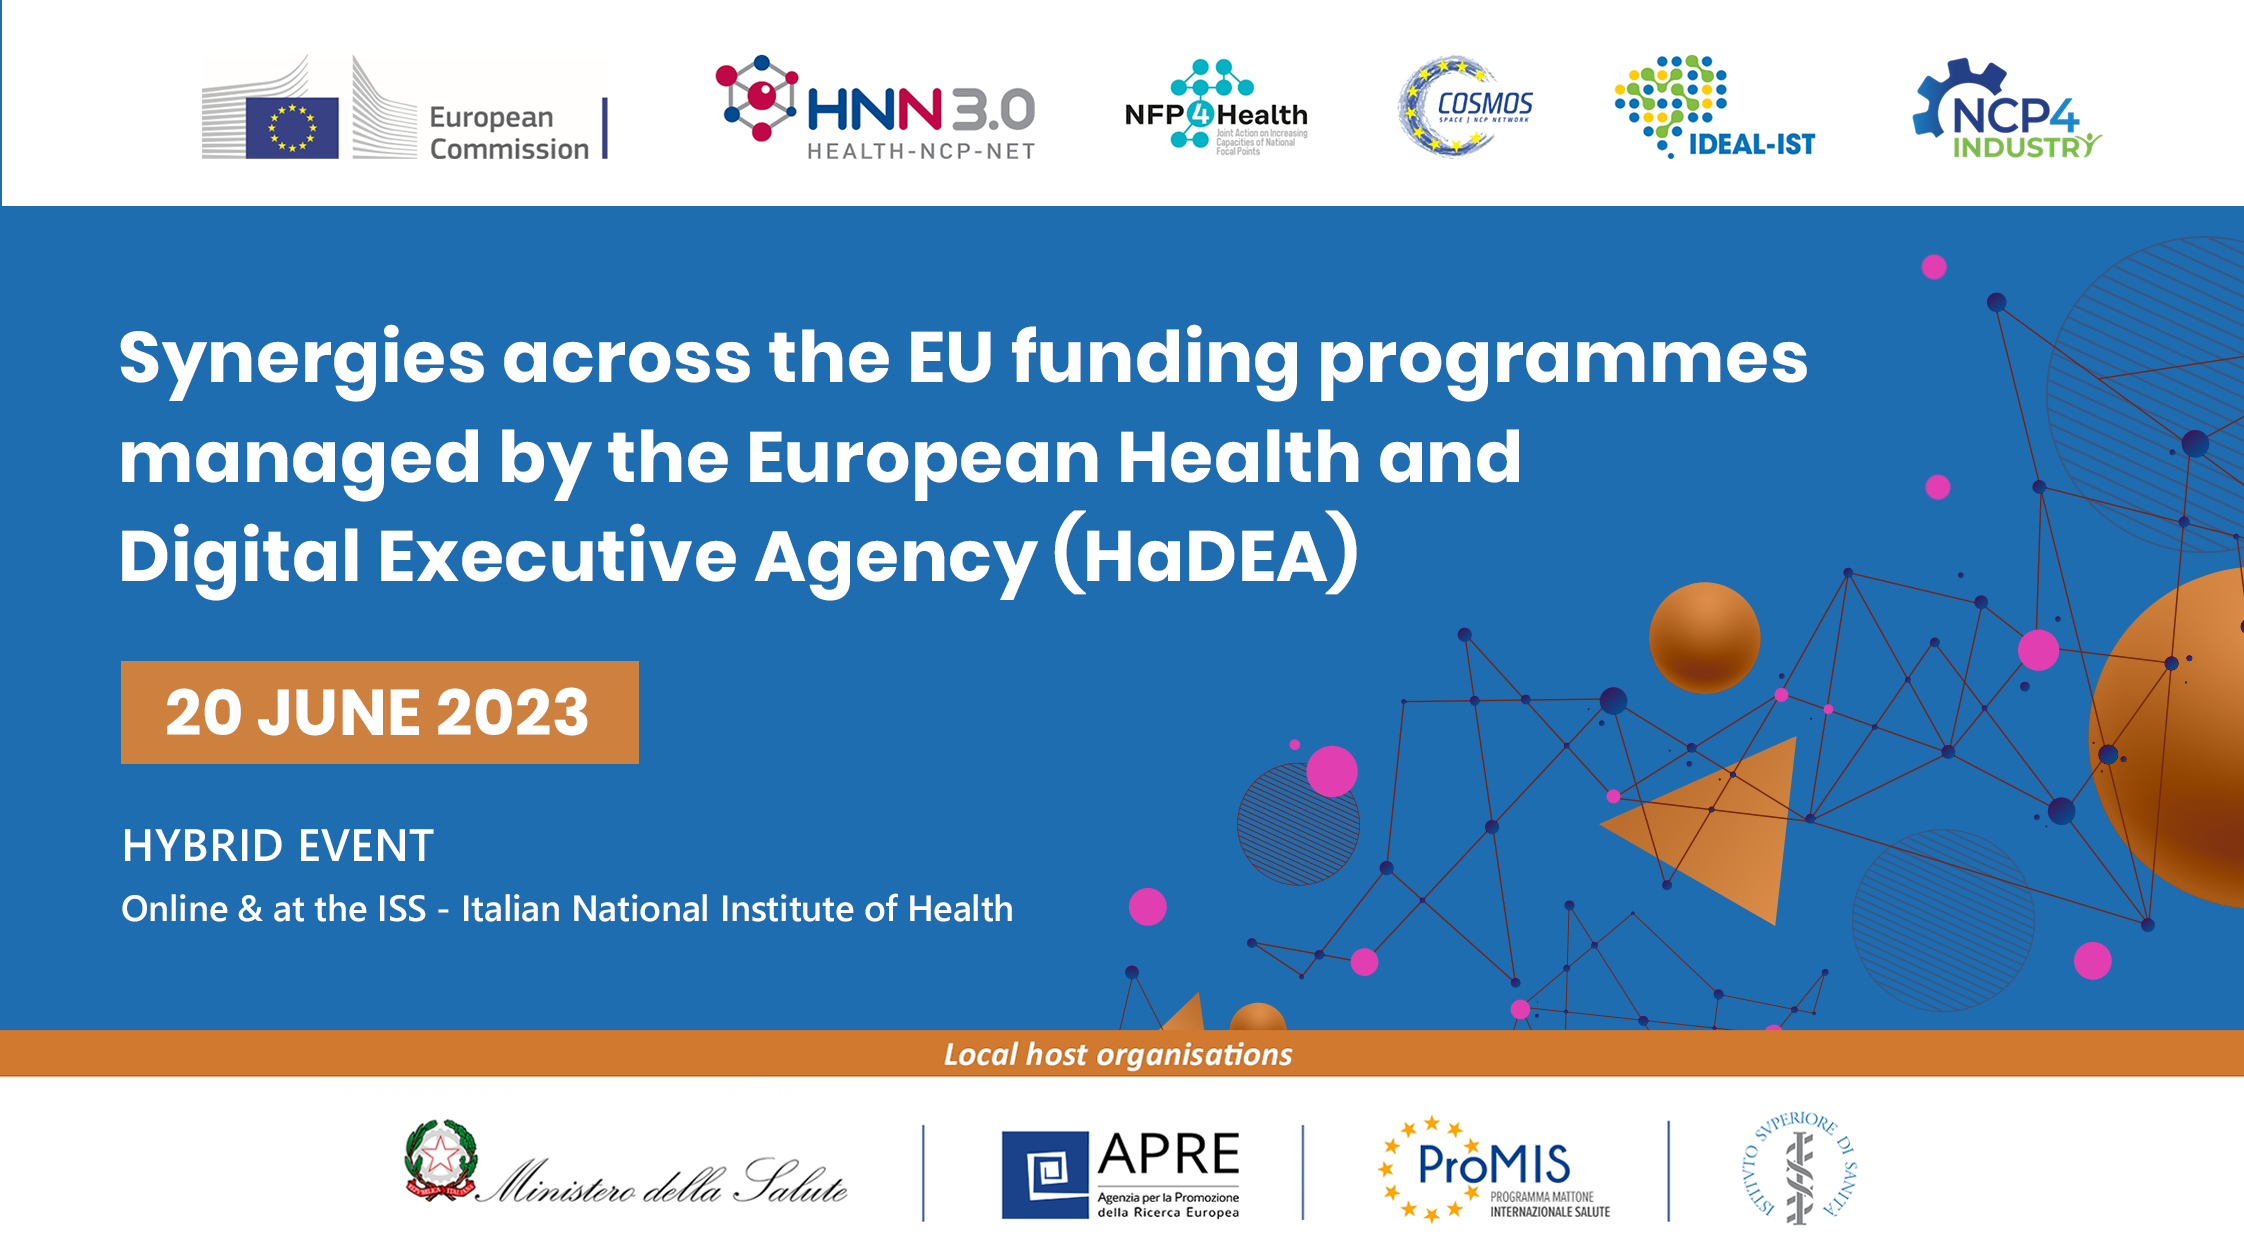 HaDEA Synergies across the EU funding programmes managed by the European Health and Digital Executive Agency